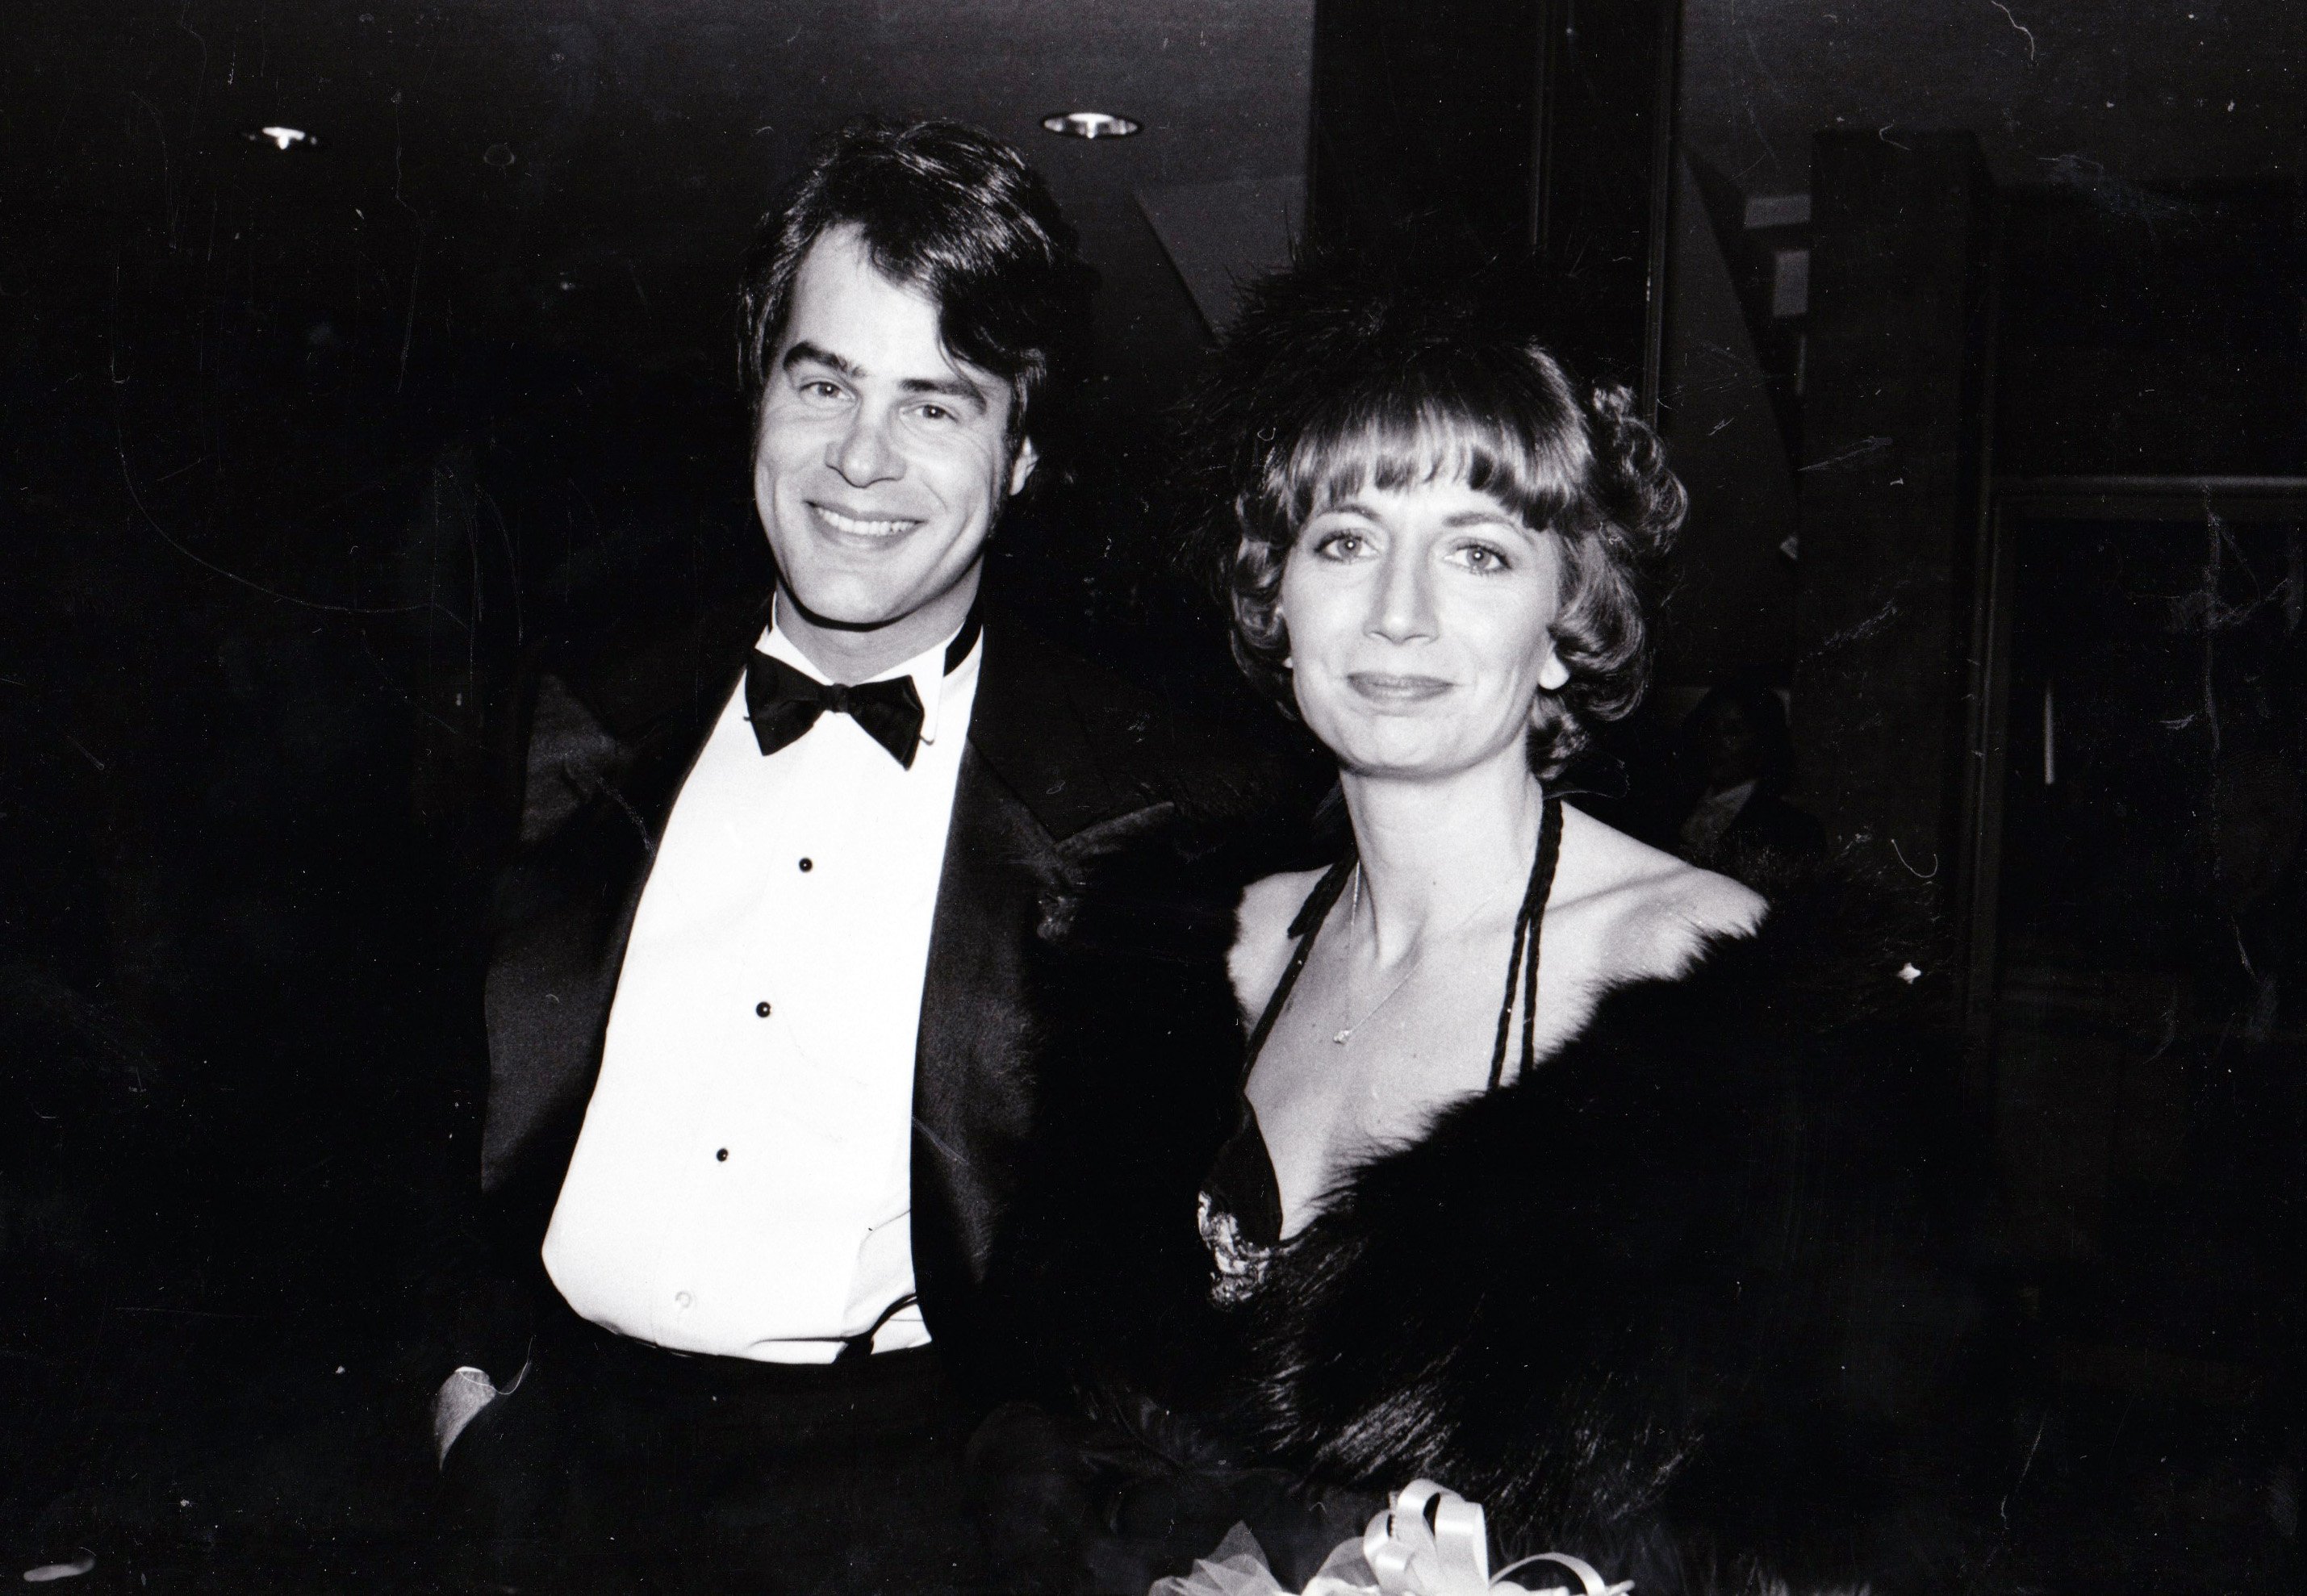  Penny Marshall and Dan Aykroyd in 1980 in New York City. | Source: Getty Images